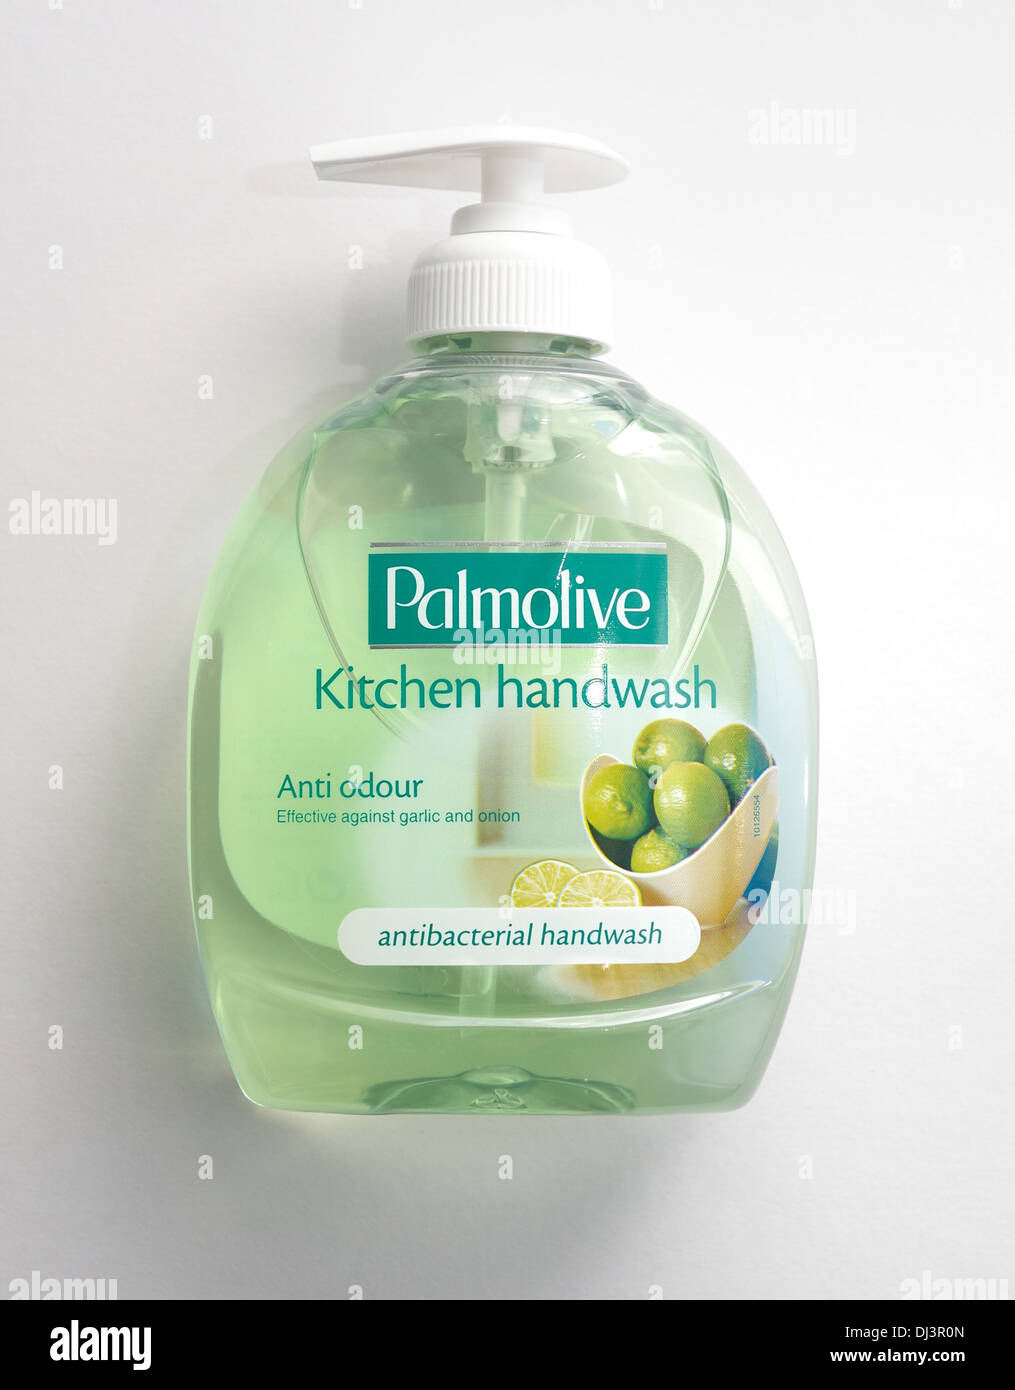 Palmolive kitchen hand wash anti odour effective against garlic onion and fish Stock Photo